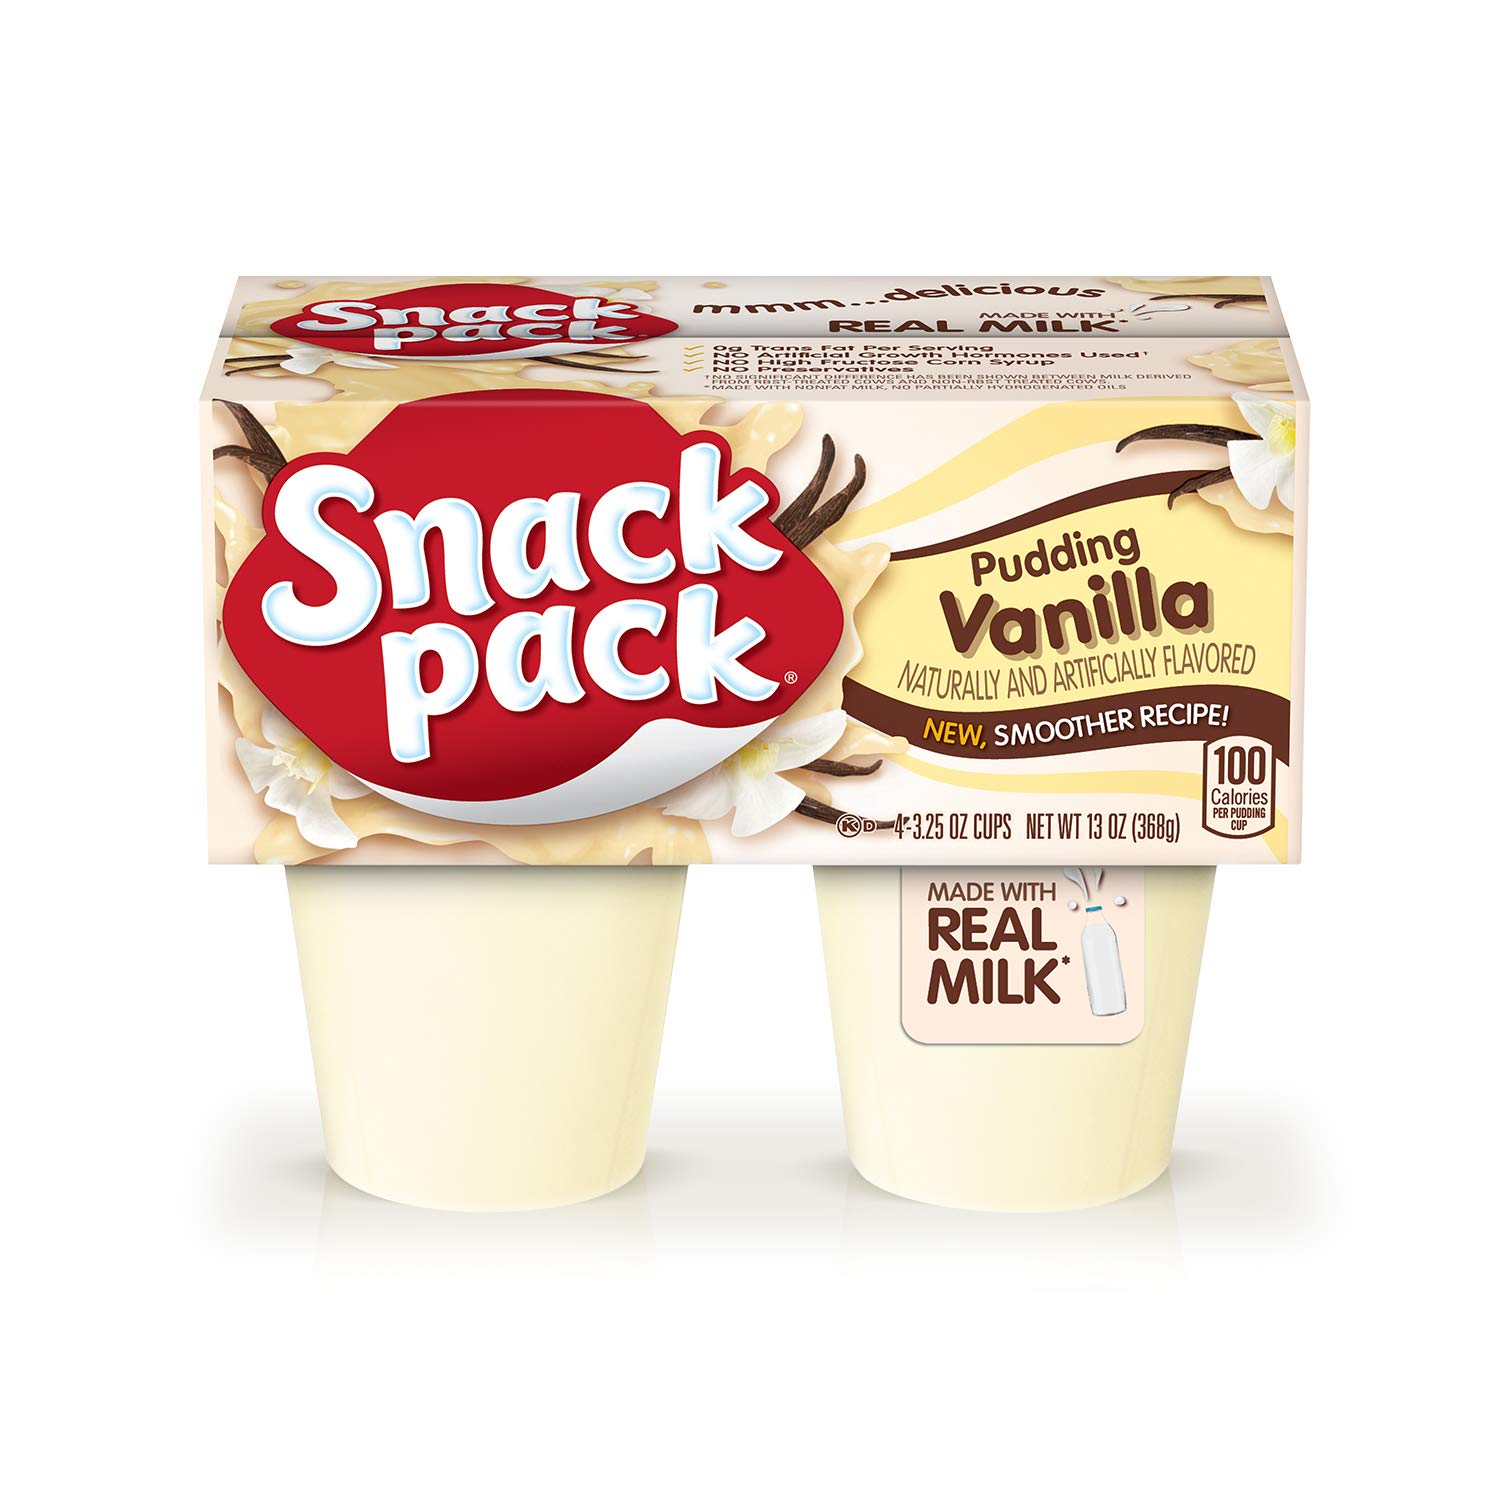 Snack Pack Vanilla Flavored Pudding, 4 Count Pudding Cups